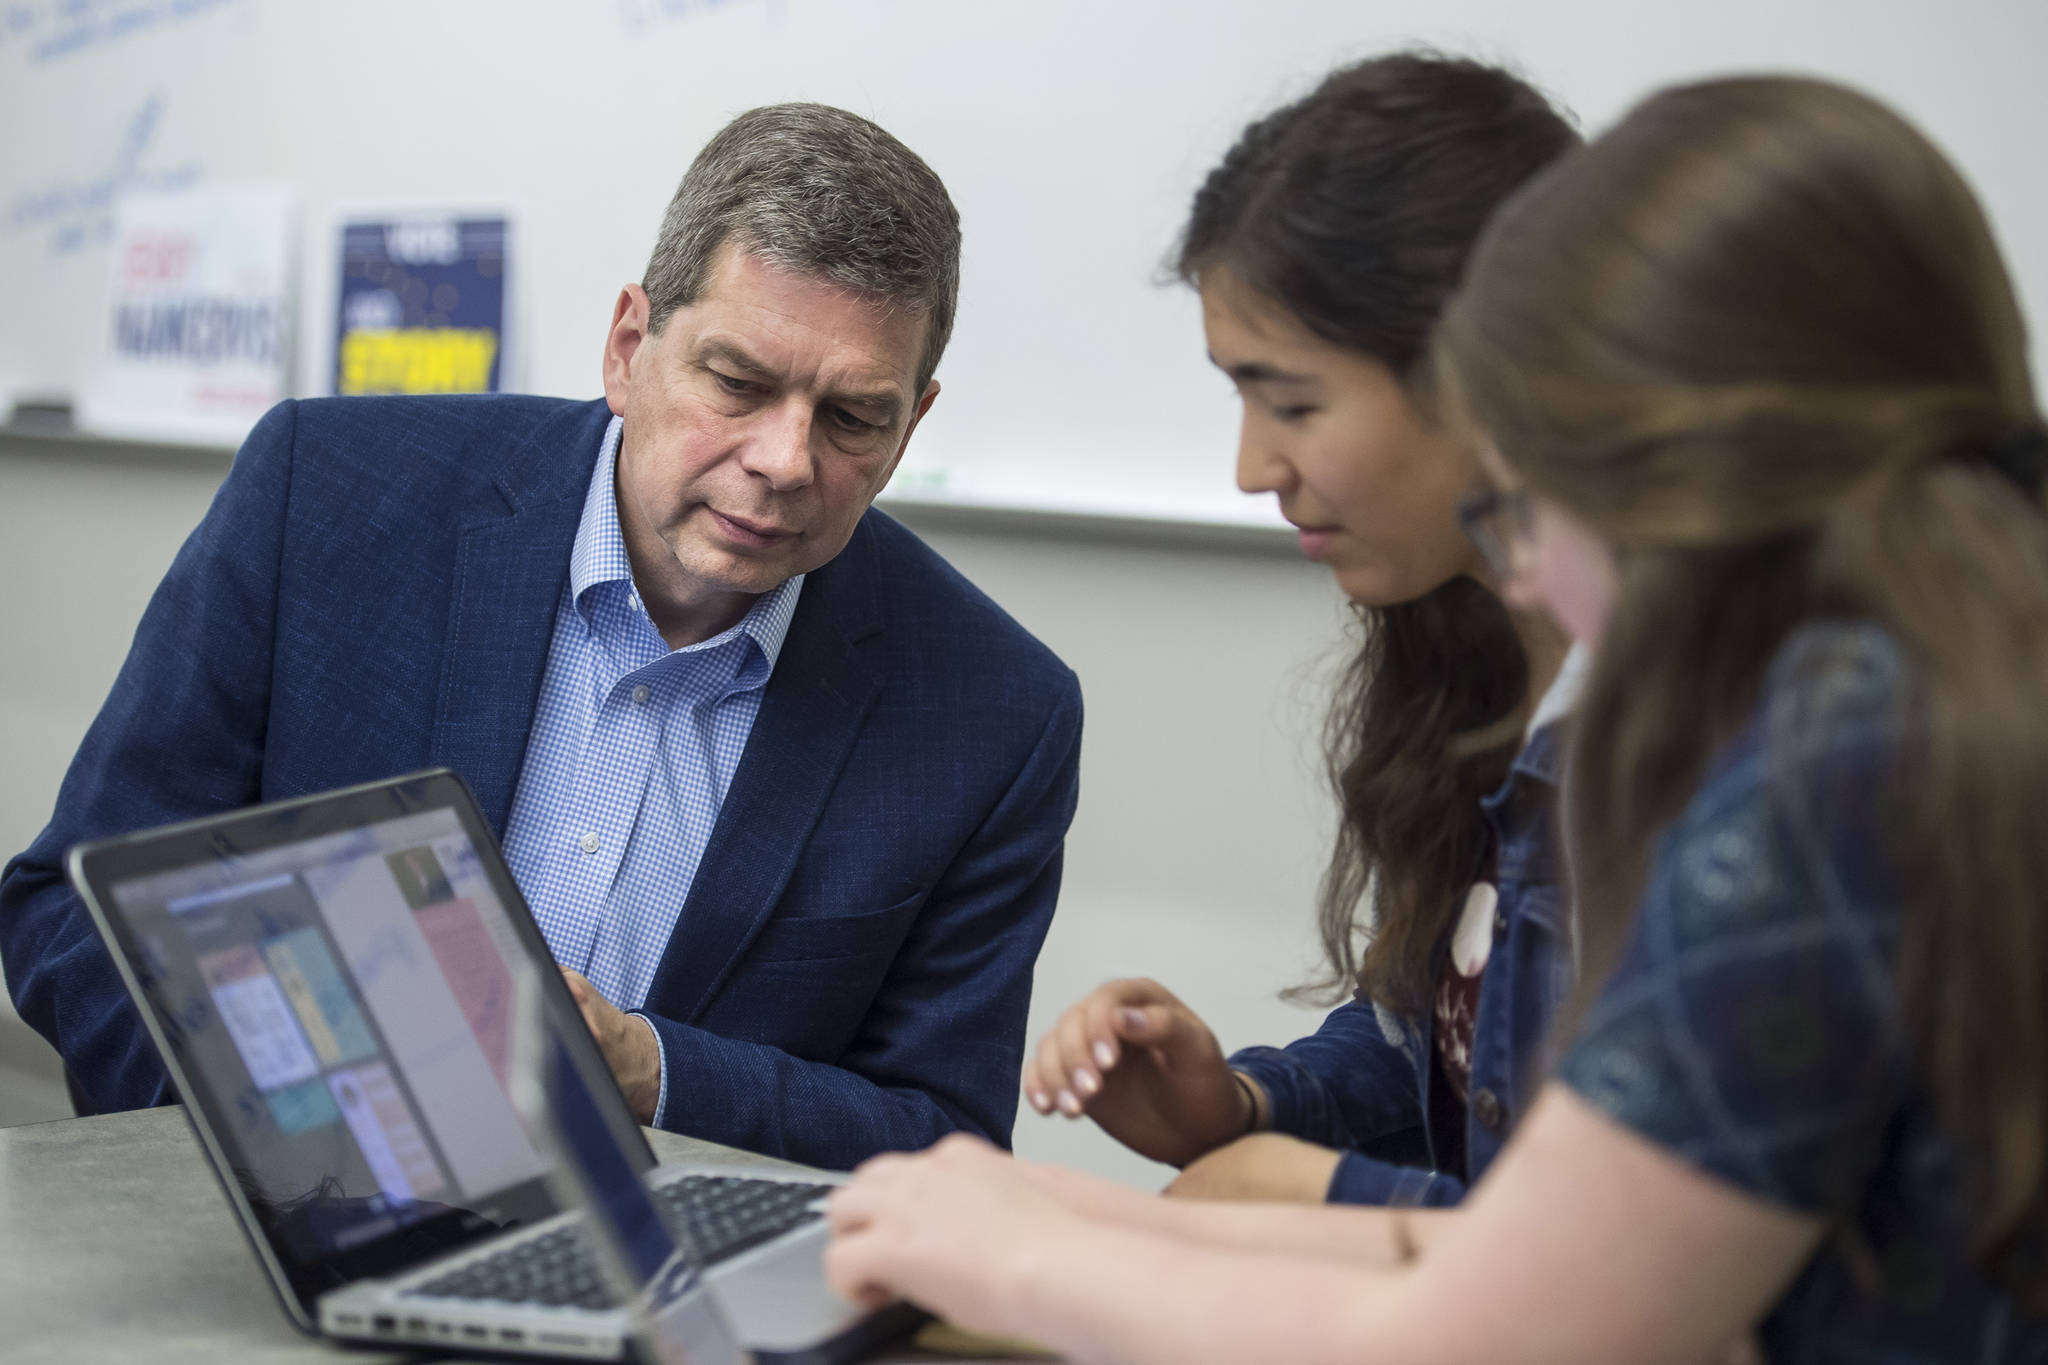 Democratis gubernatorial candidate Mark Begich watches as Thunder Mountain High School senior students Tristan Weissmuller, center, and Briannah Letter work on a candidate voter page during their government class on Friday, Oct. 26, 2018. (Michael Penn | Juneau Empire)